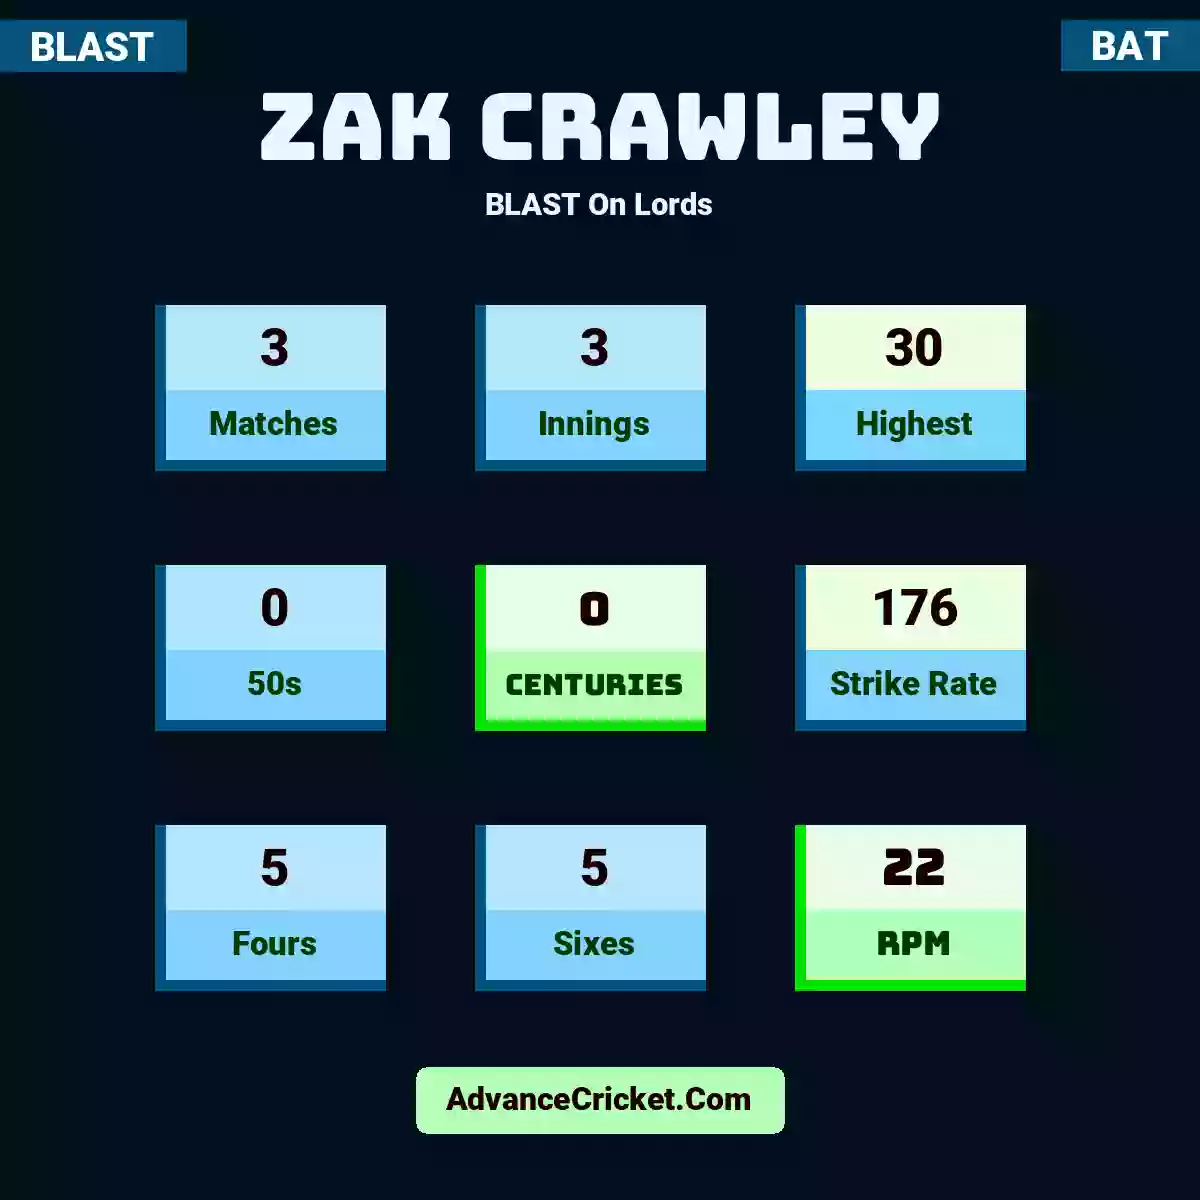 Zak Crawley BLAST  On Lords, Zak Crawley played 3 matches, scored 30 runs as highest, 0 half-centuries, and 0 centuries, with a strike rate of 176. Z.Crawley hit 5 fours and 5 sixes, with an RPM of 22.